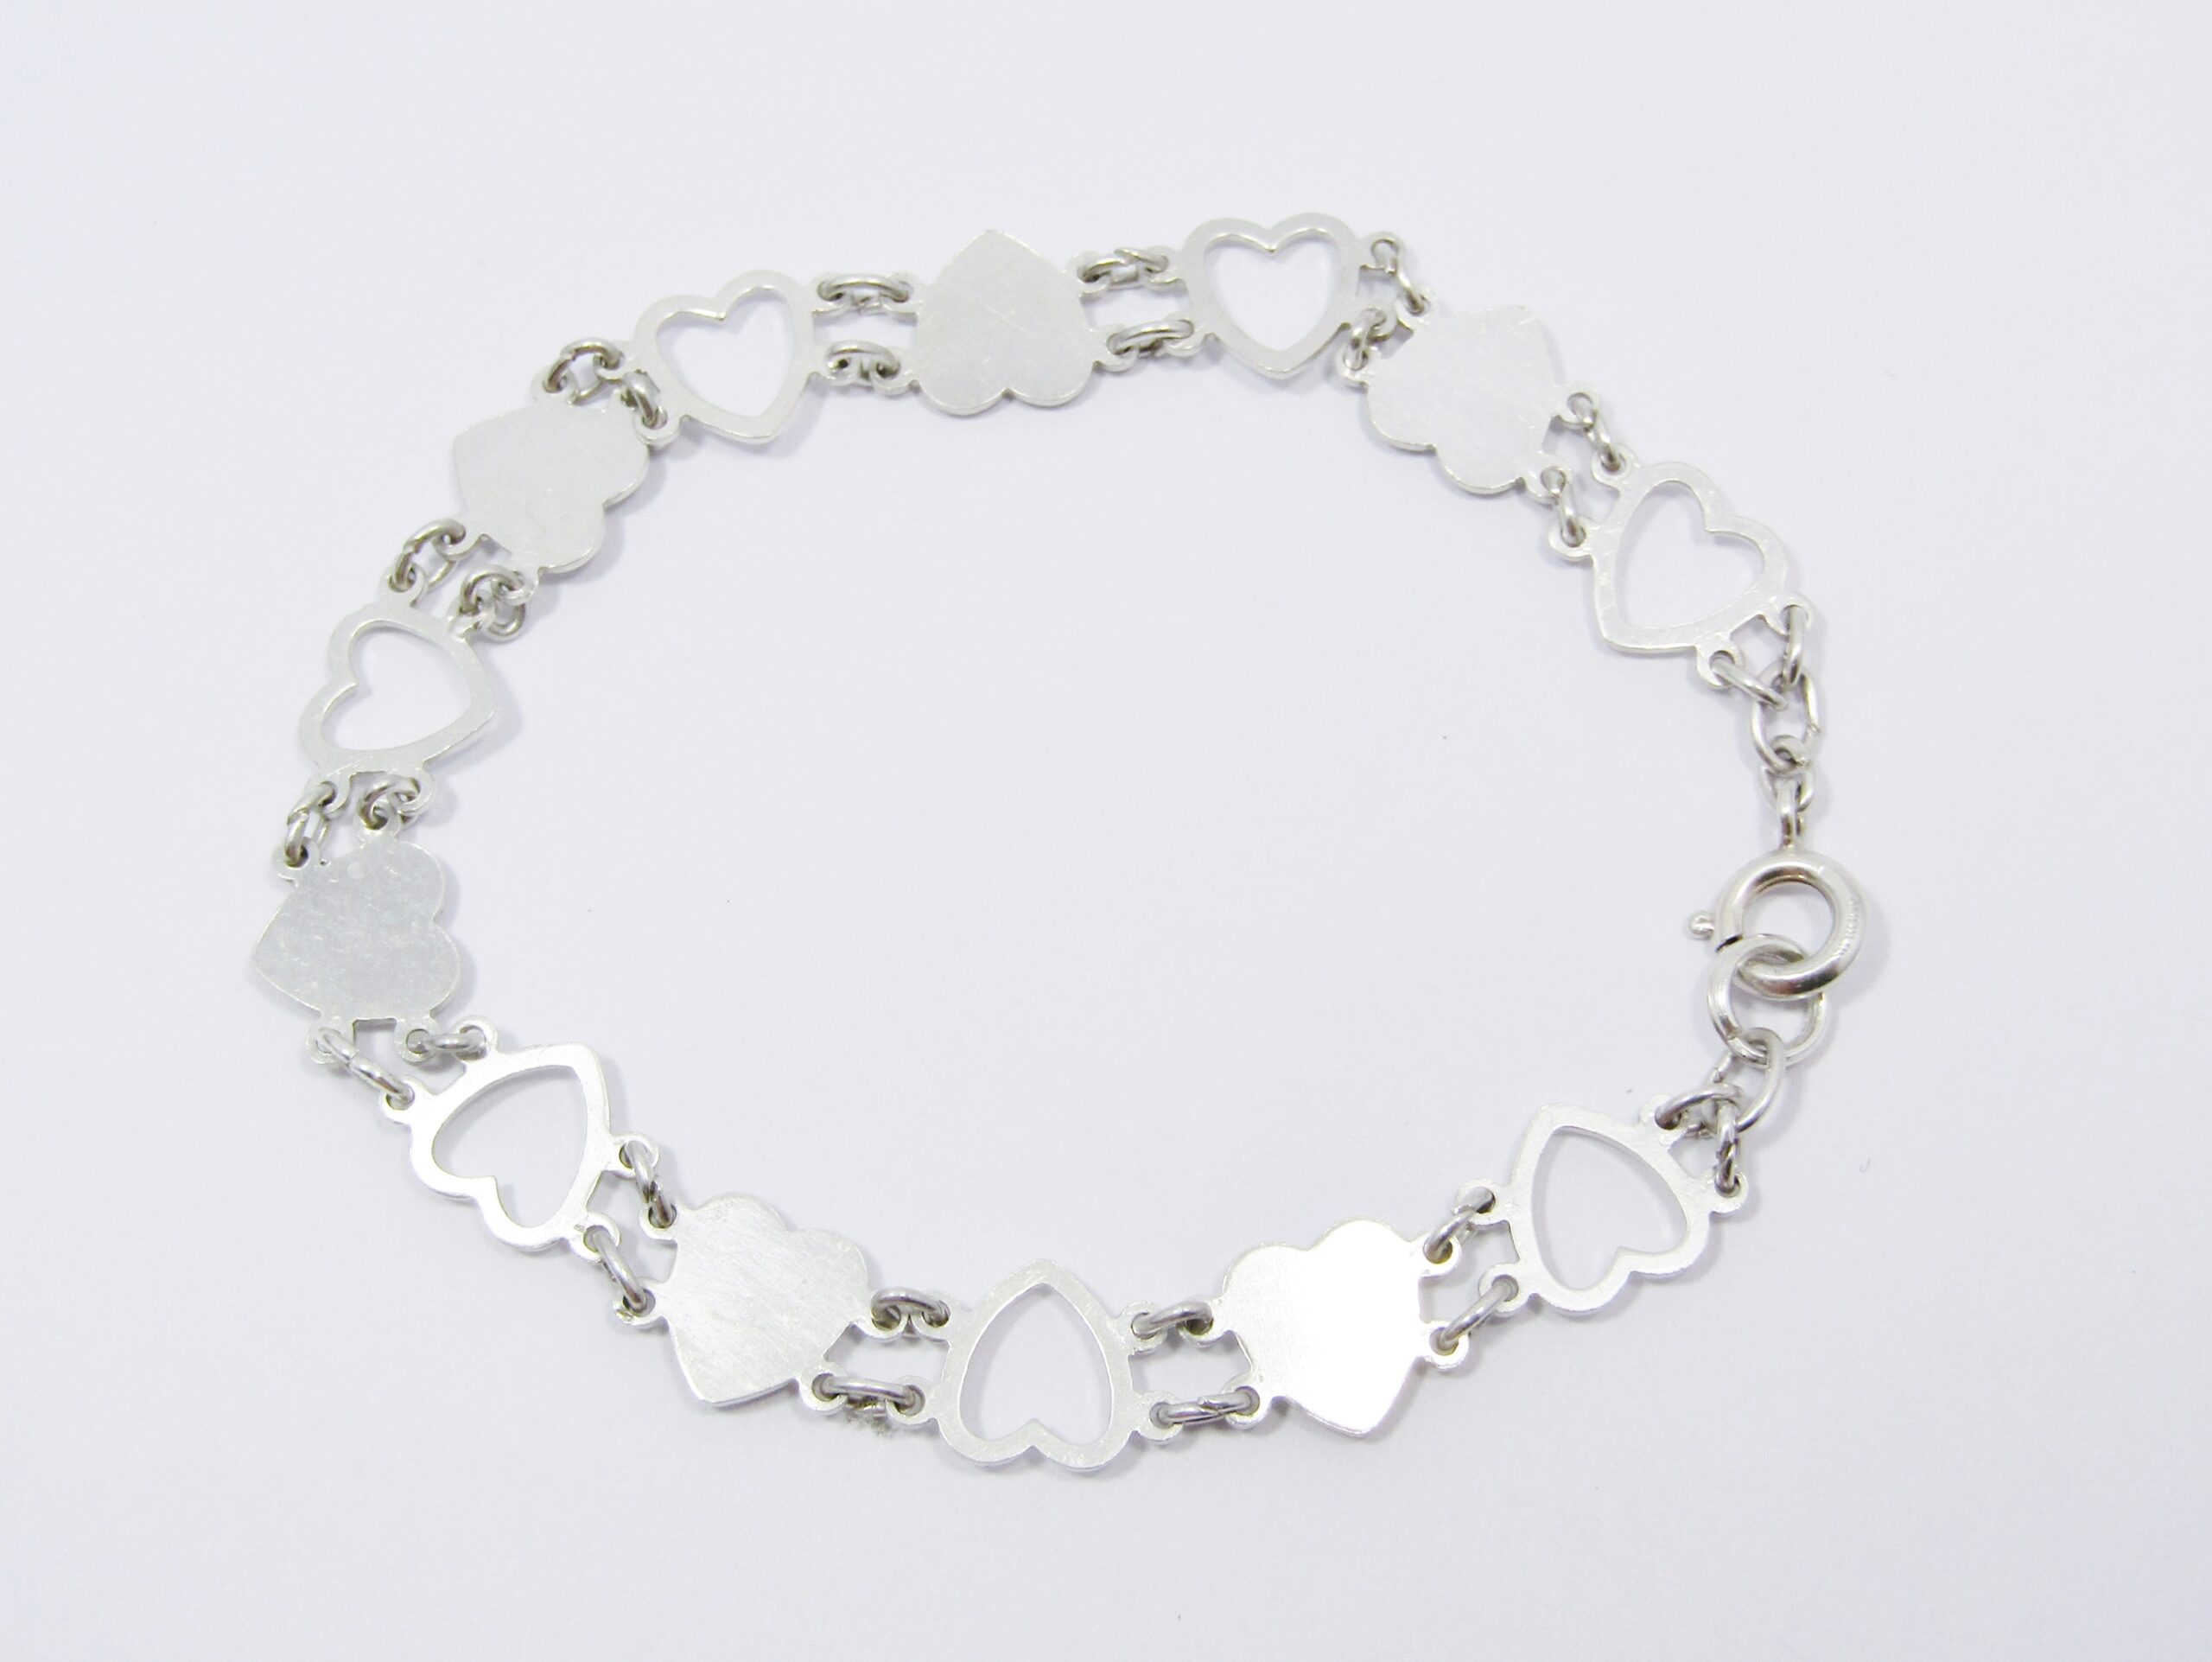 A Stunning Heart Cut Out Design Bracelet in Sterling Silver.